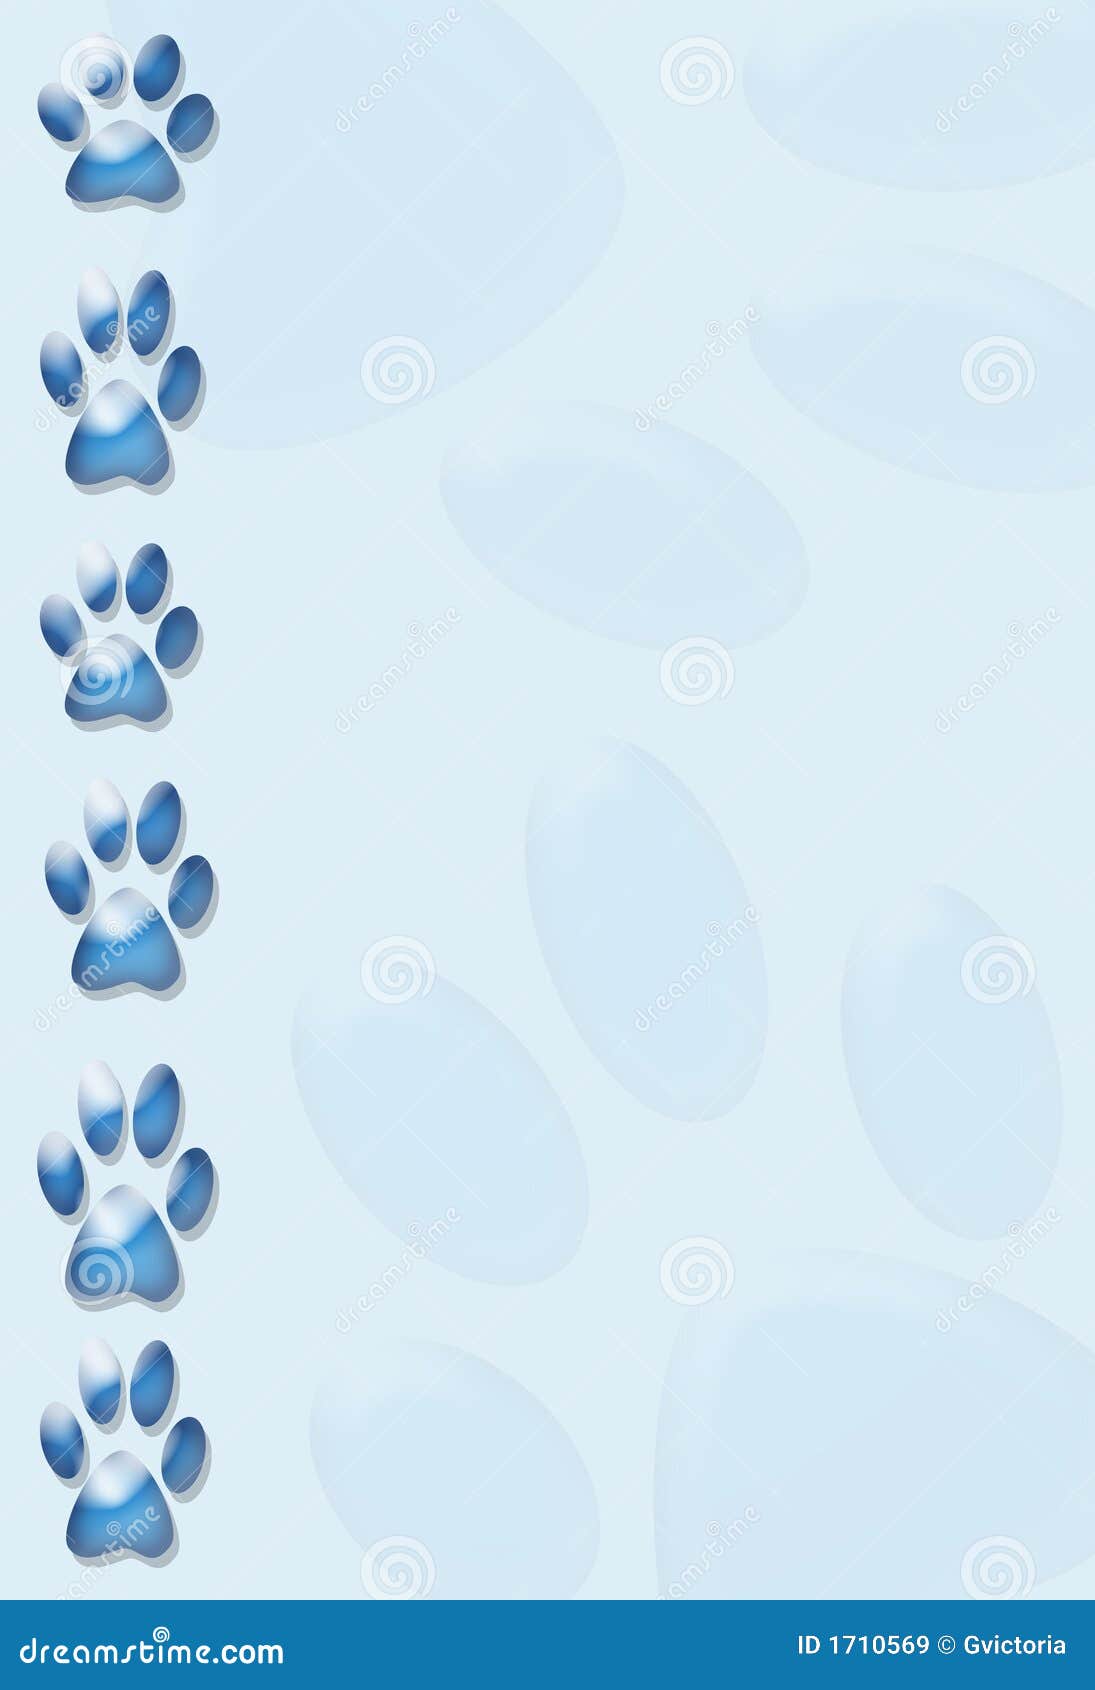 Paws Border Royalty Free Stock Images - Image: 1710569